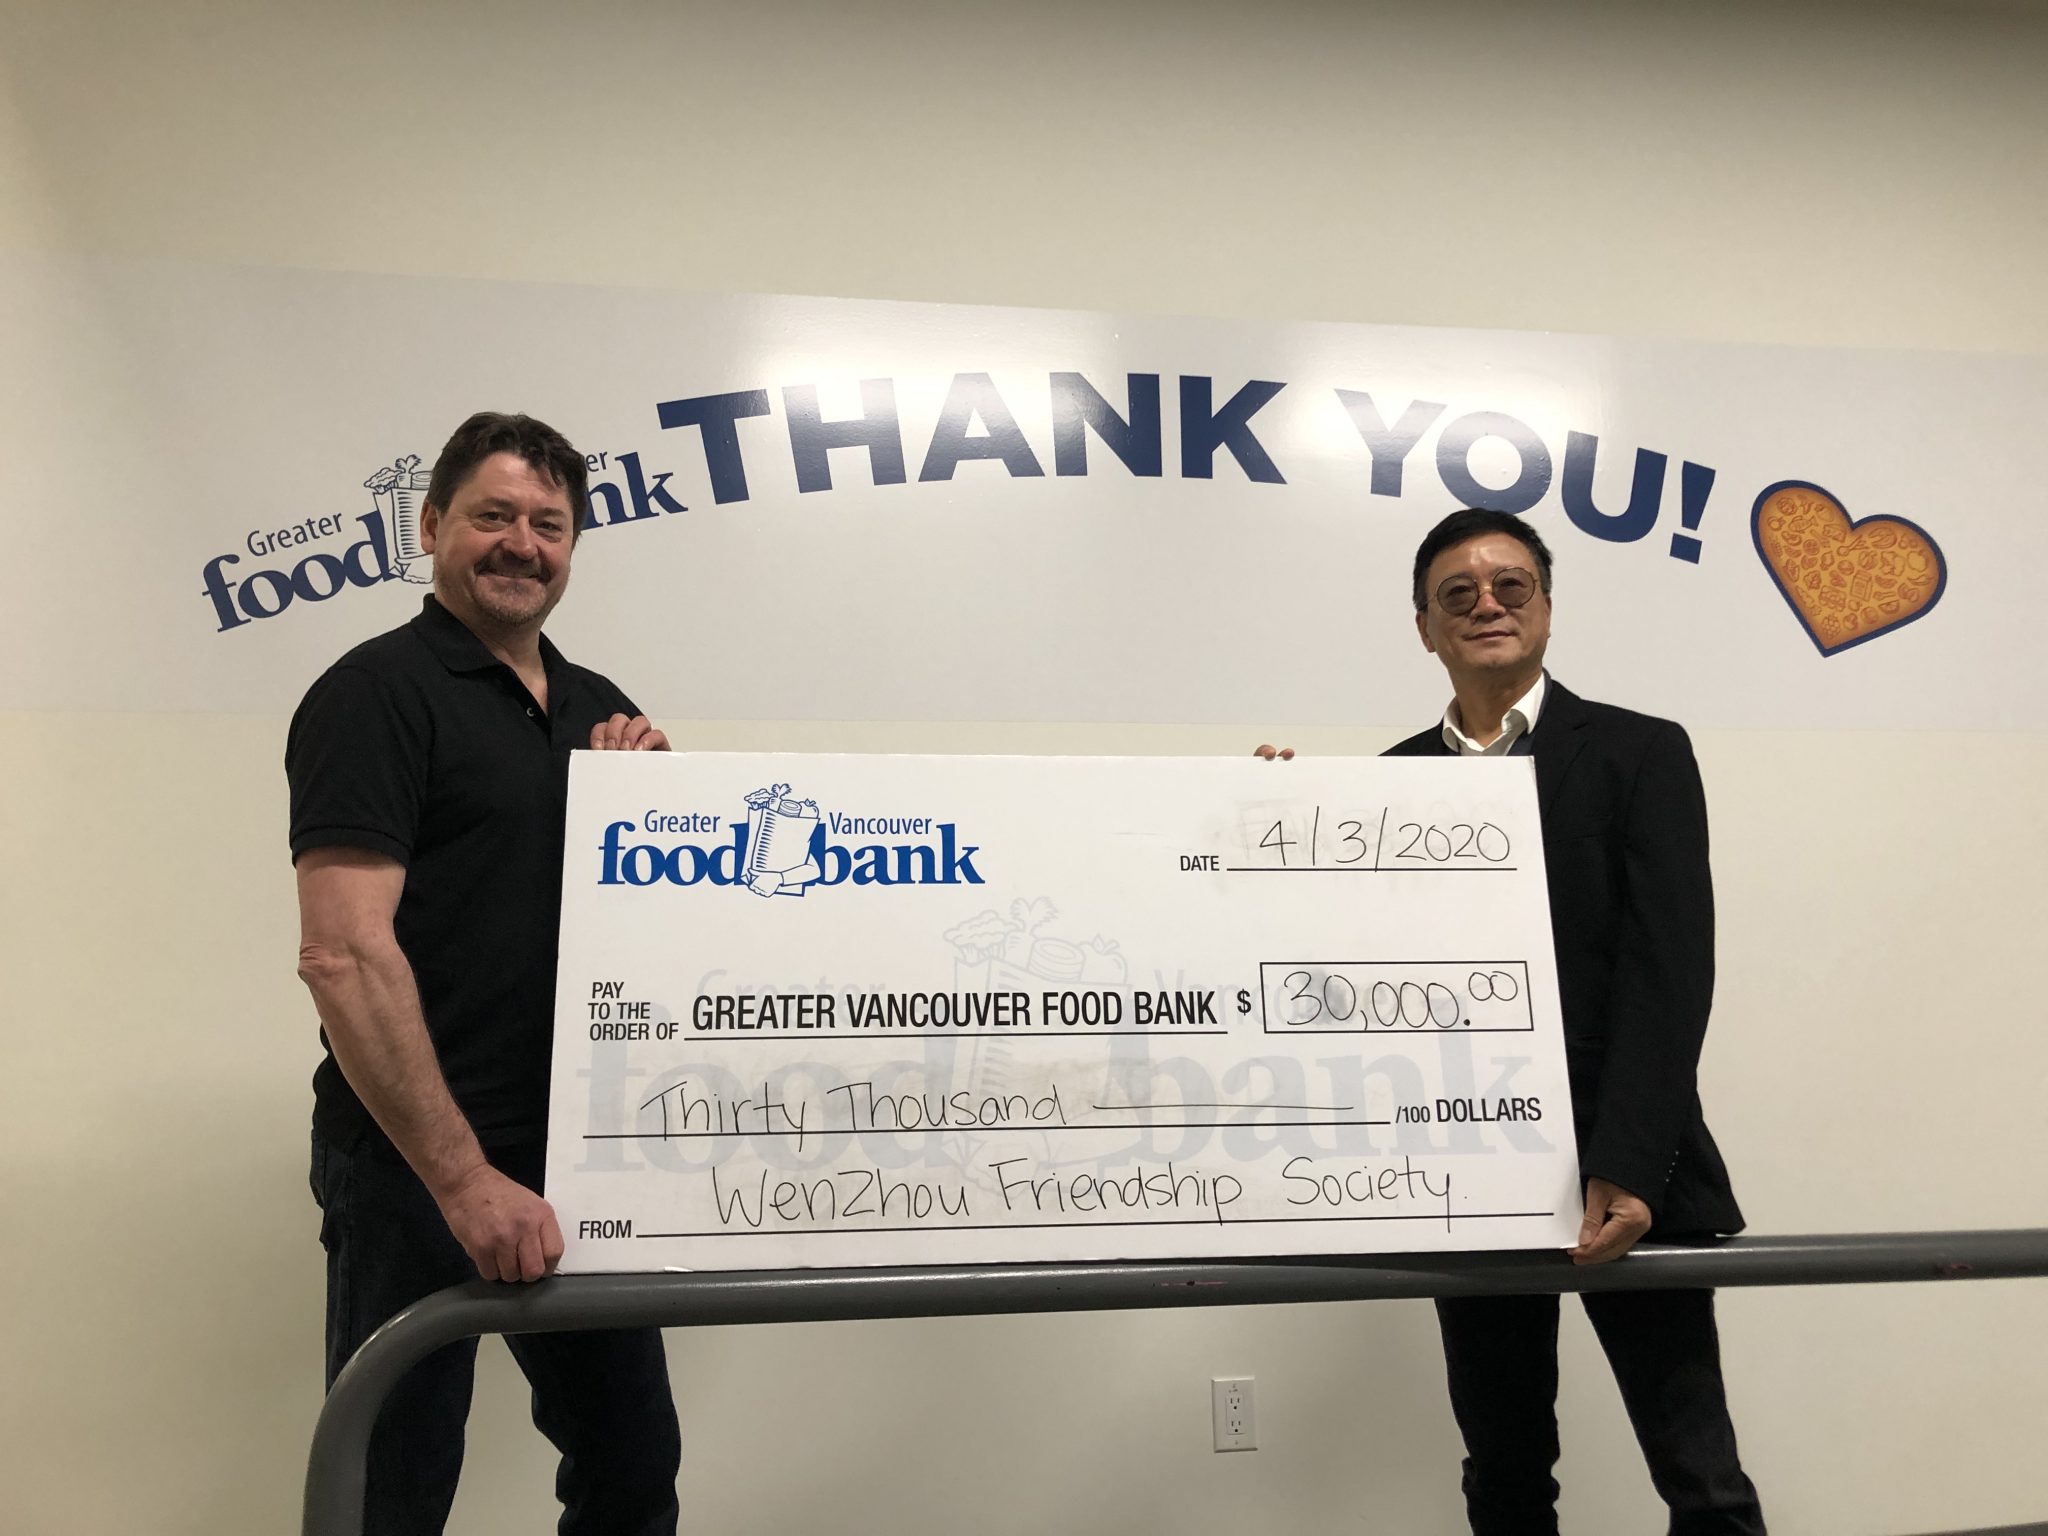 Wenzhou Friendship Society makes $30,000 food bank donation for COVID-19 relief assistance